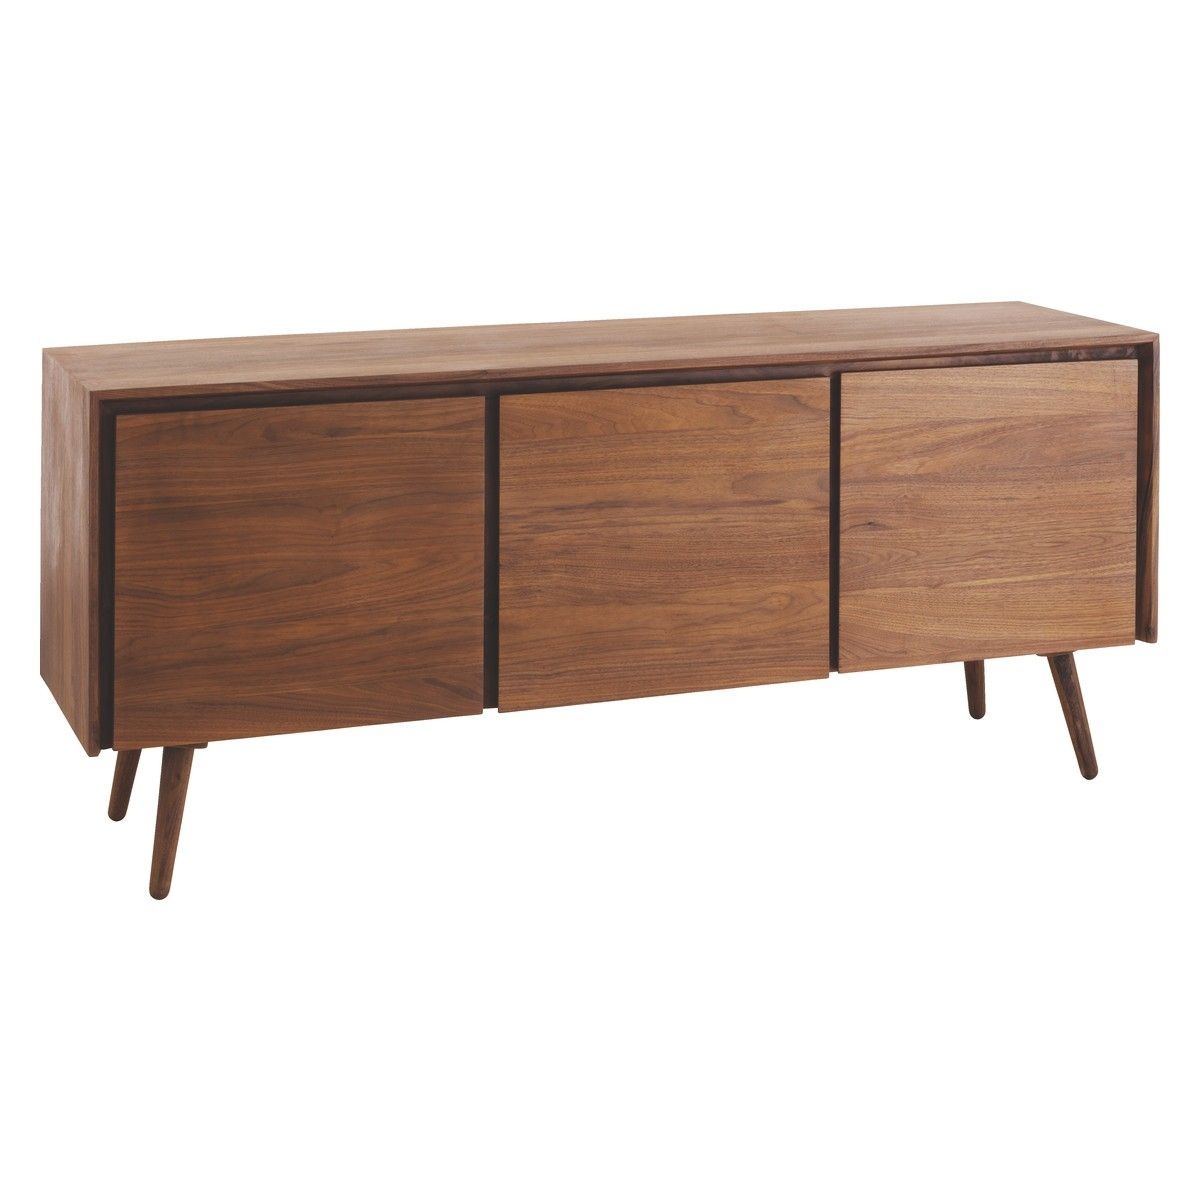 Vince Walnut 3 Door Mid Century Sideboard | Buy Now At Habitat Uk Pertaining To Best And Newest Walnut Finish 2 Door/3 Drawer Sideboards (Photo 8 of 20)